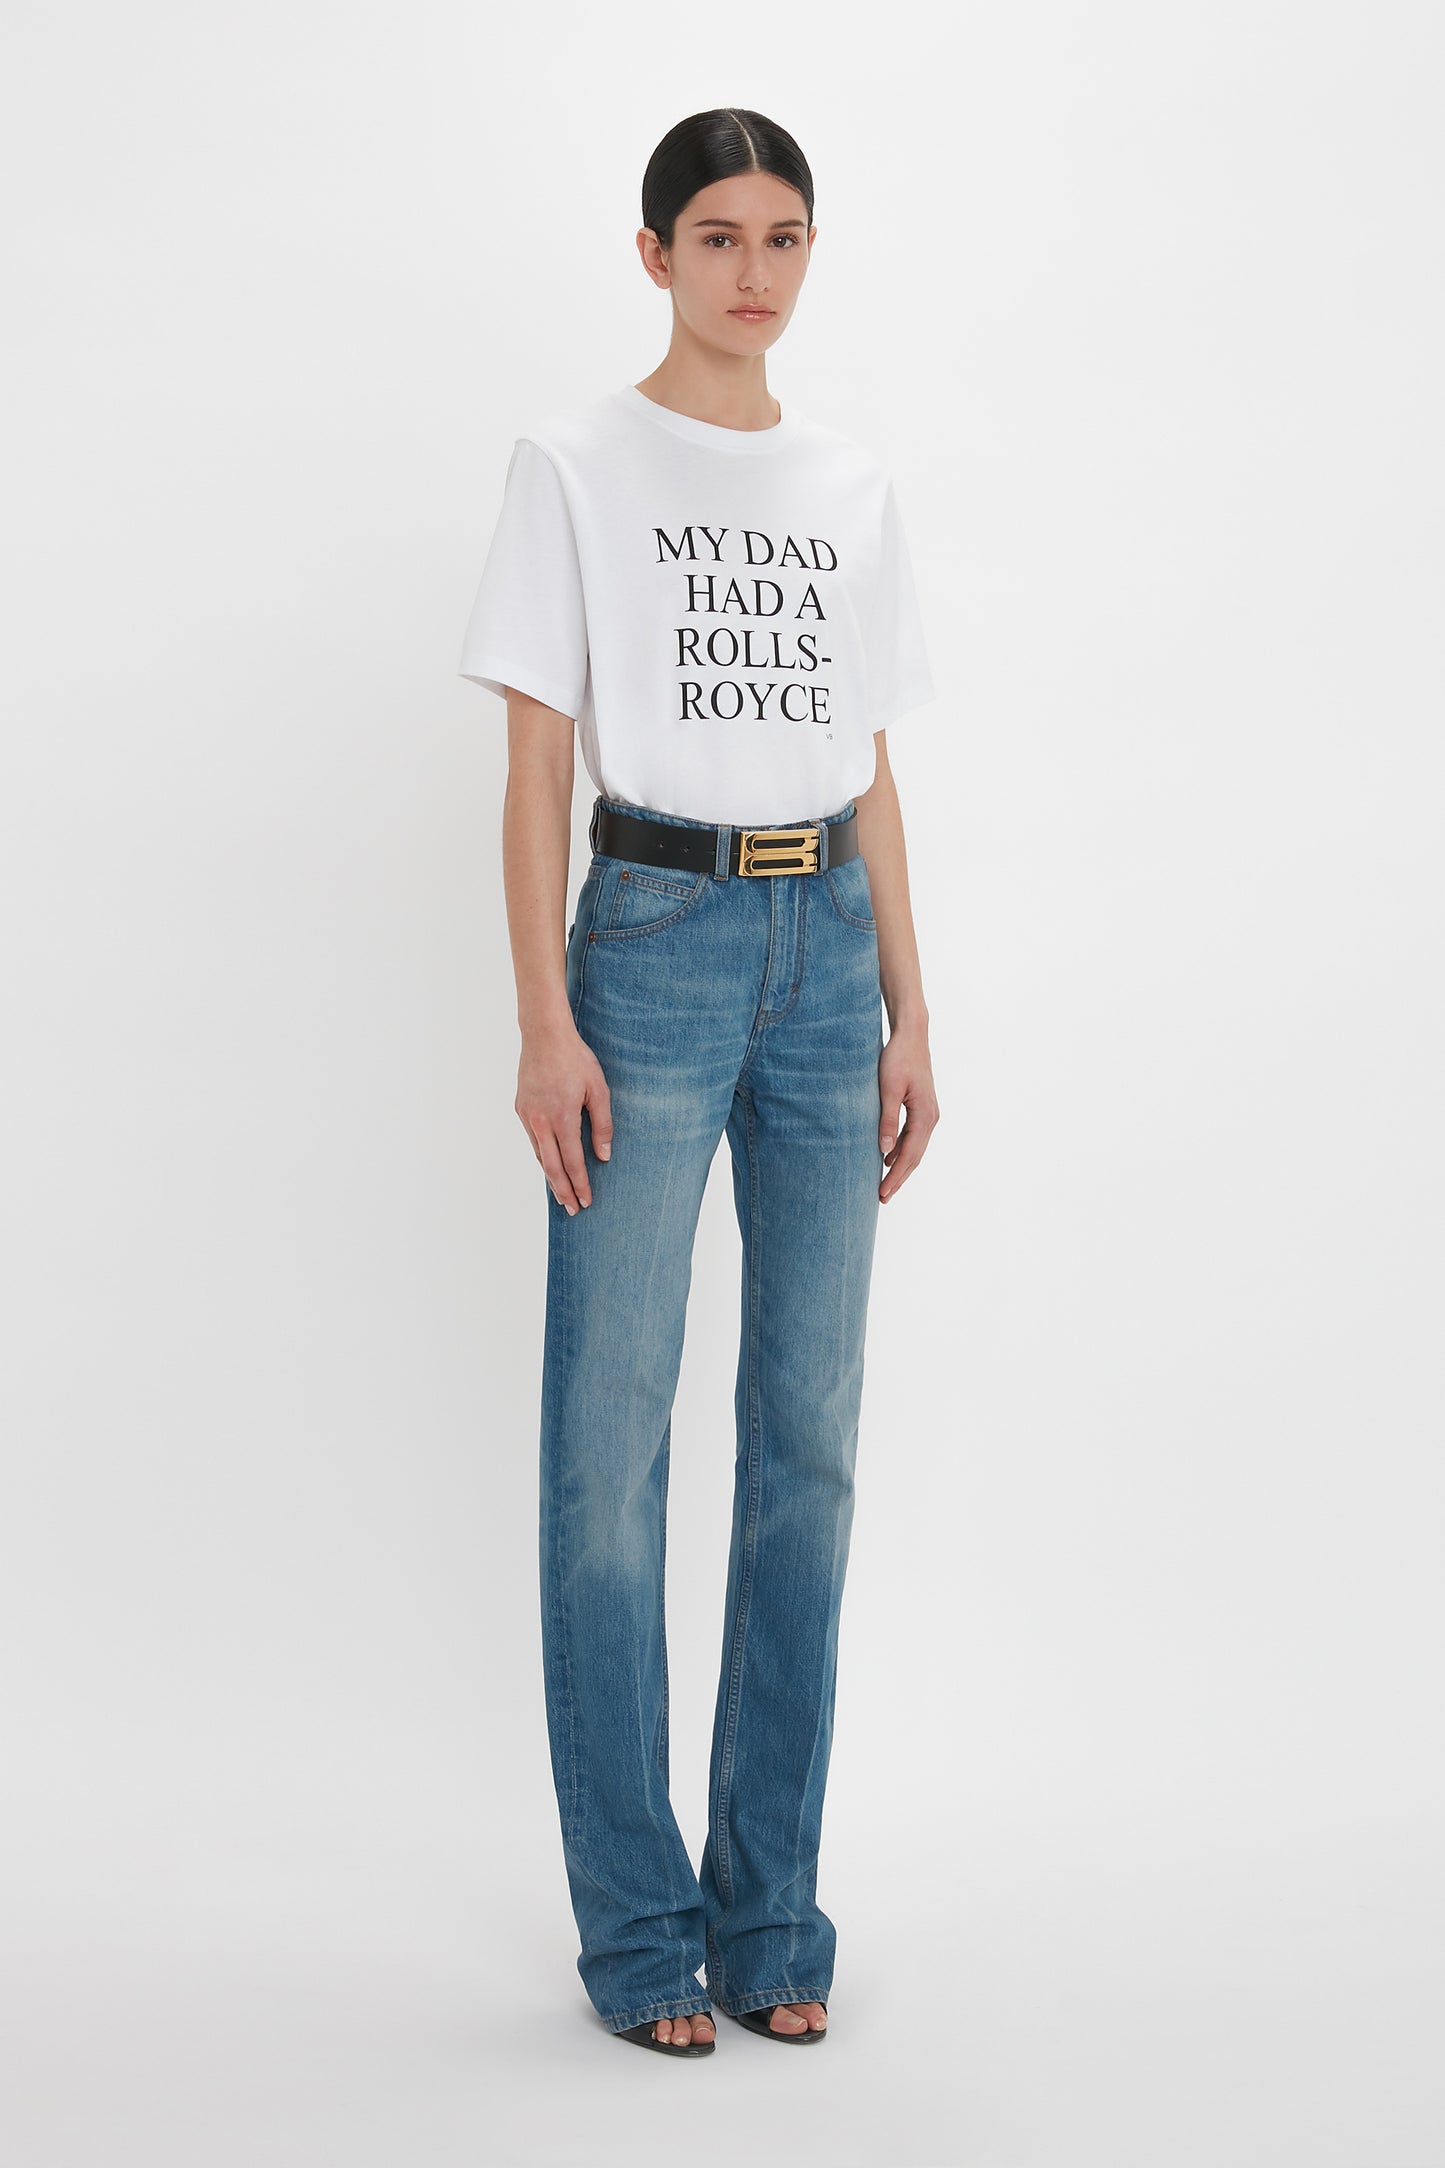 A woman stands against a white background wearing a white T-shirt that reads "MY DAD HAD A ROLLS-ROYCE," Julia Jean In Broken Vintage Wash by Victoria Beckham, and black open-toe shoes. She has dark hair pulled back, a black belt with a gold buckle, and her high waistline jeans are made from 100% cotton denim.